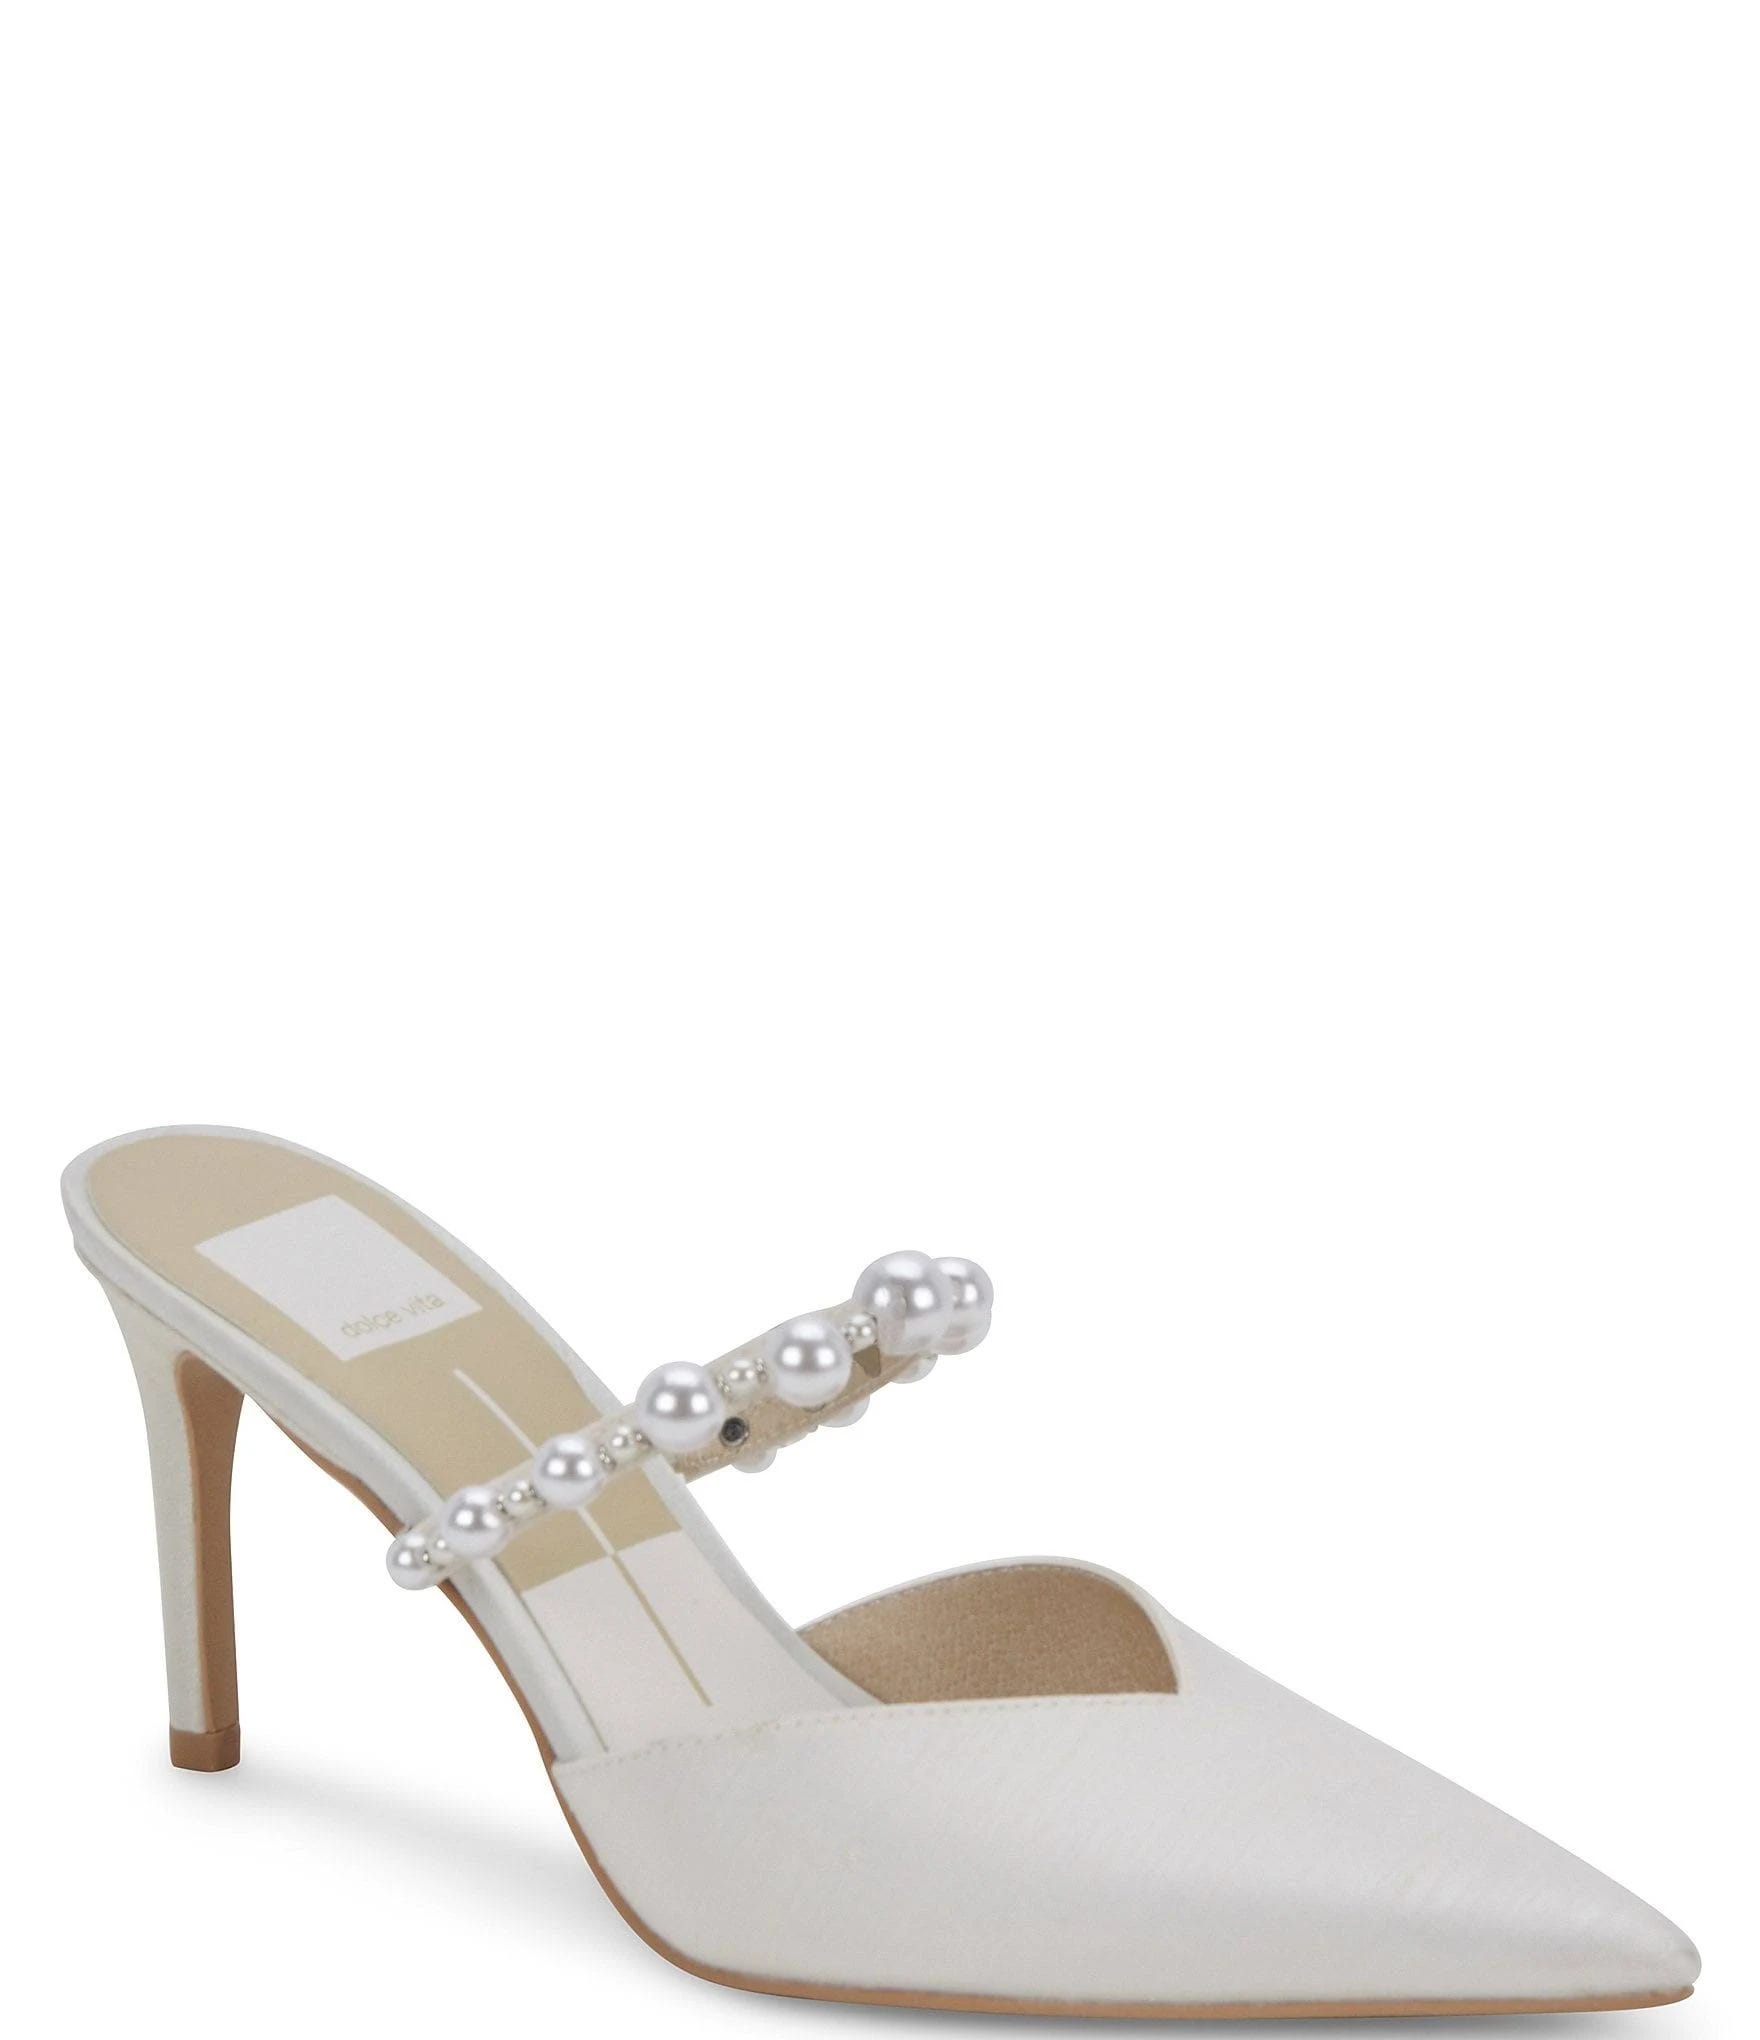 Comfortable, Pointed Mule Heels from Dolce Vita | Image